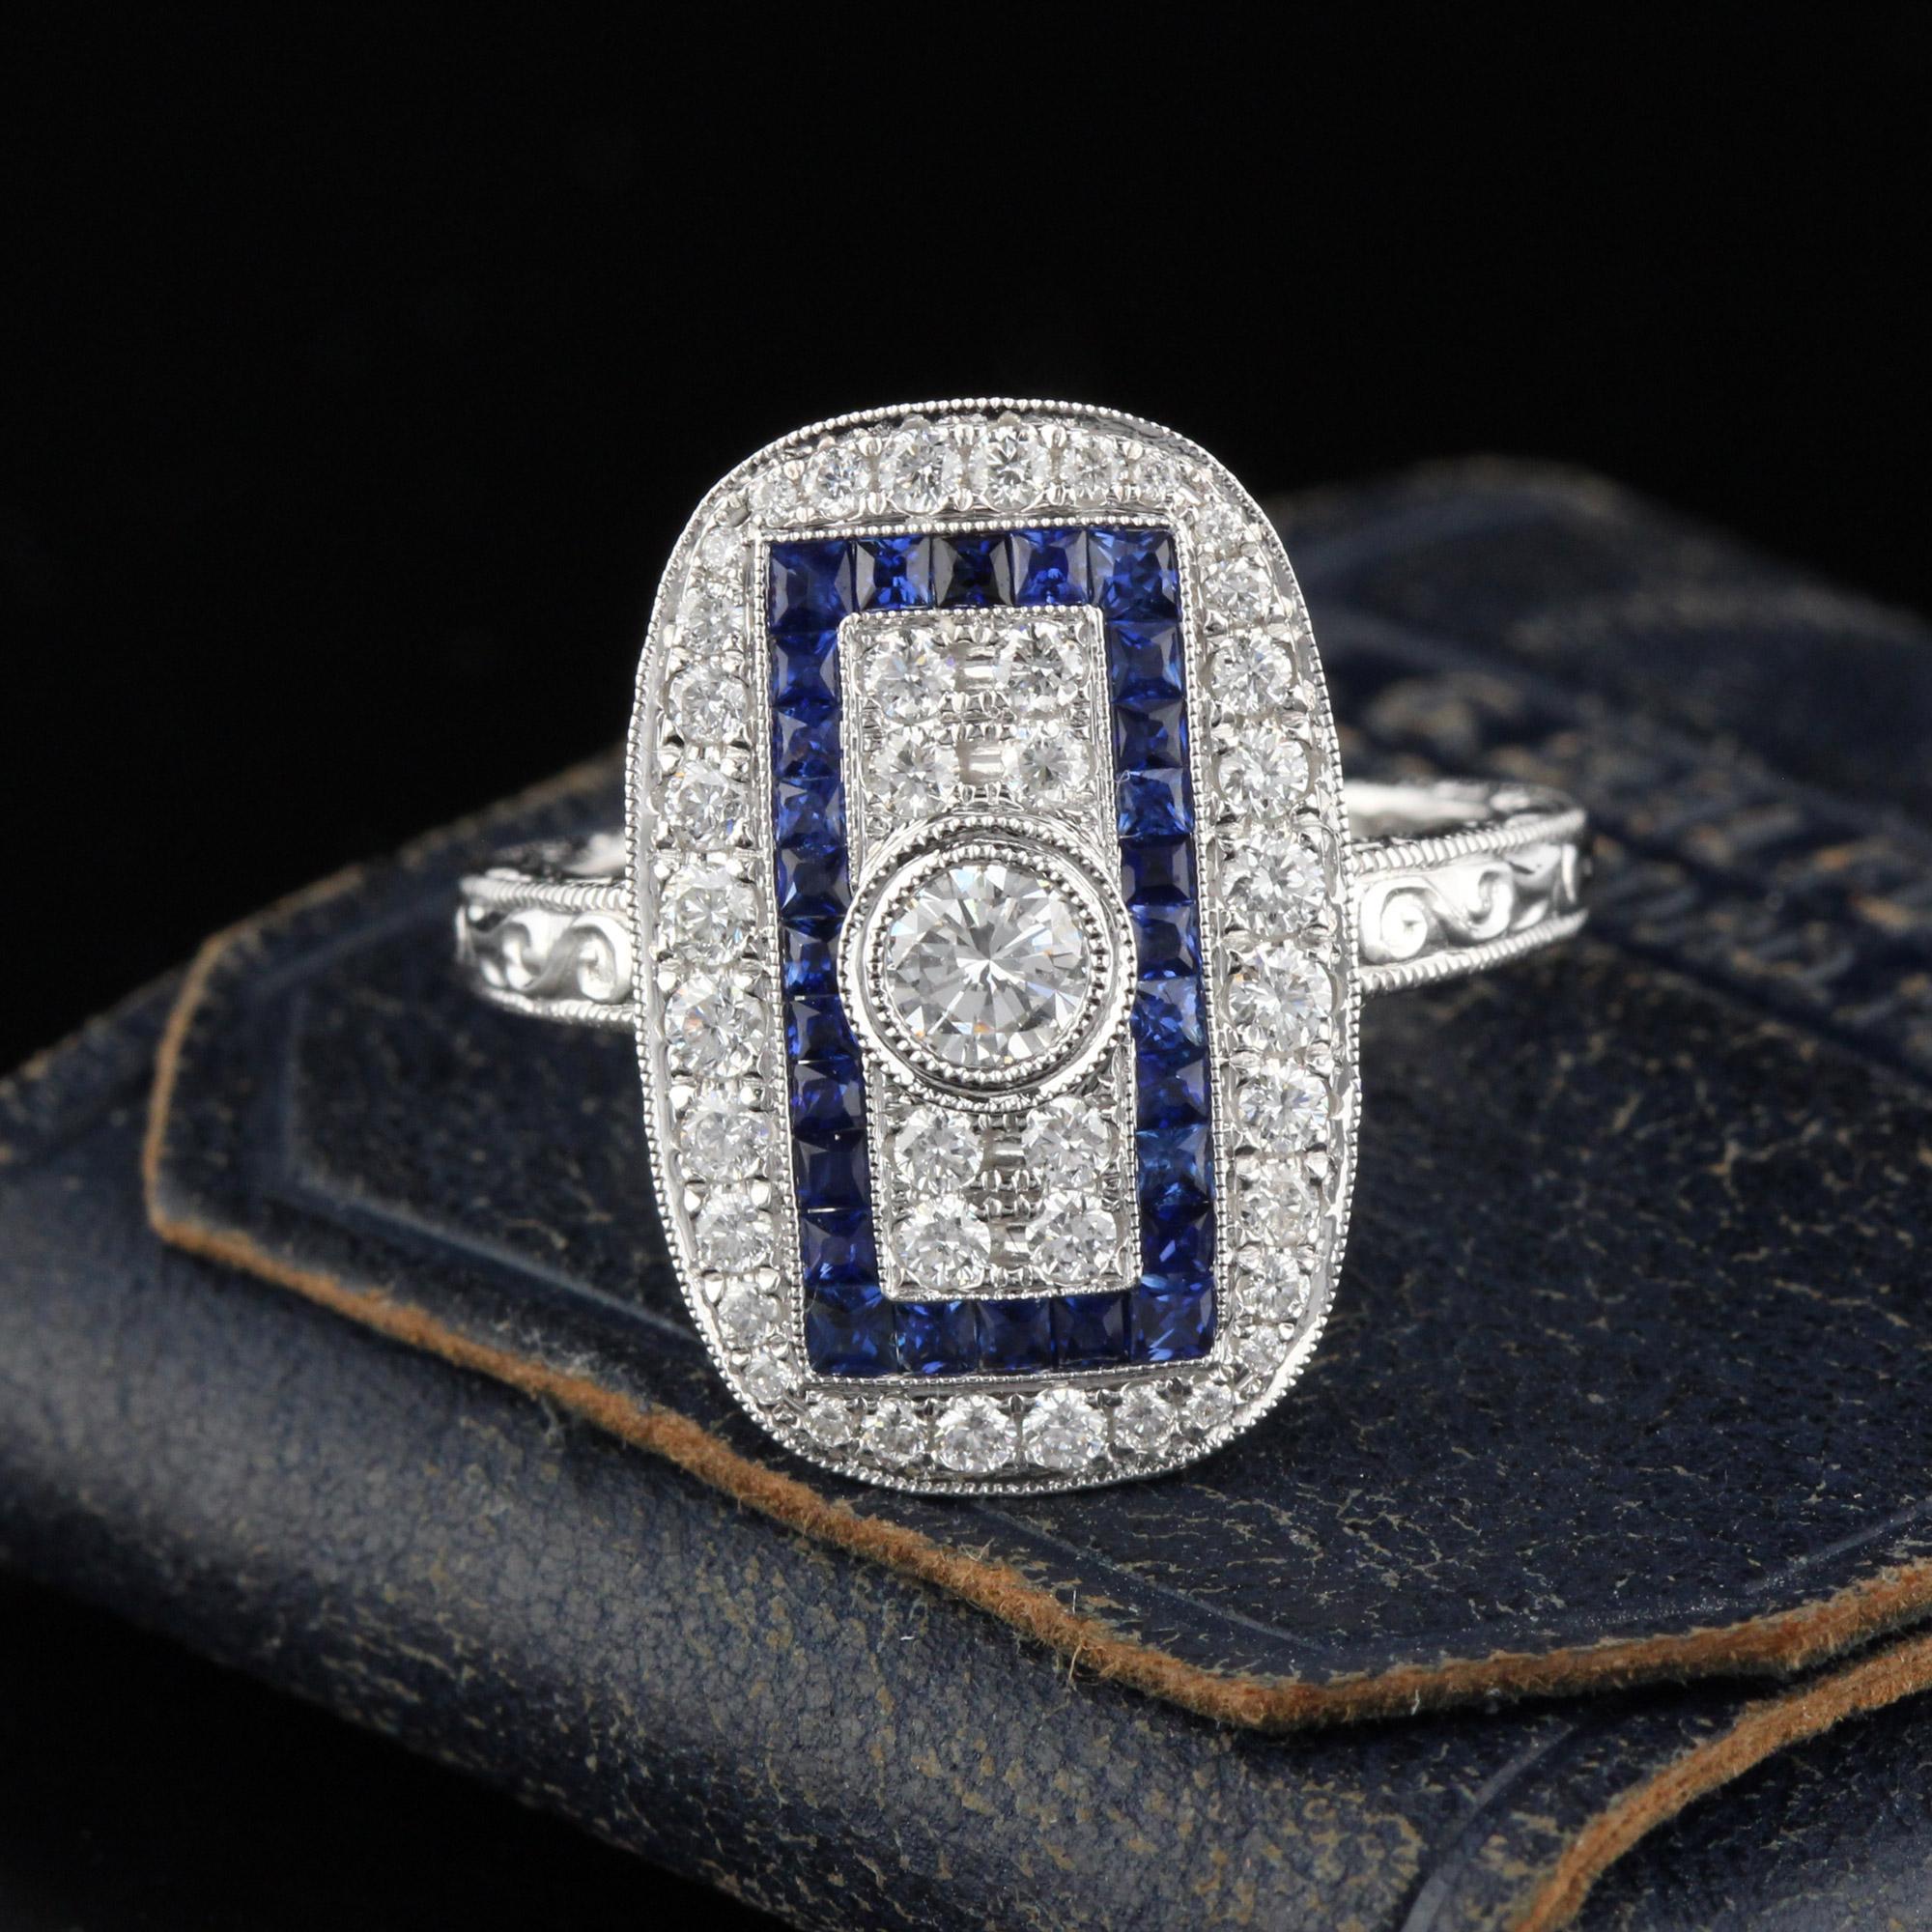 Beautiful Art Deco style ring in 18K White Gold with diamonds and channel set natural sapphires! This ring is hand engraved and mil-grained.

Item #R0047

Metal: 18K White Gold

Center Diamond Weight: 0.25 cts 

Total Diamond Weight: 0.73